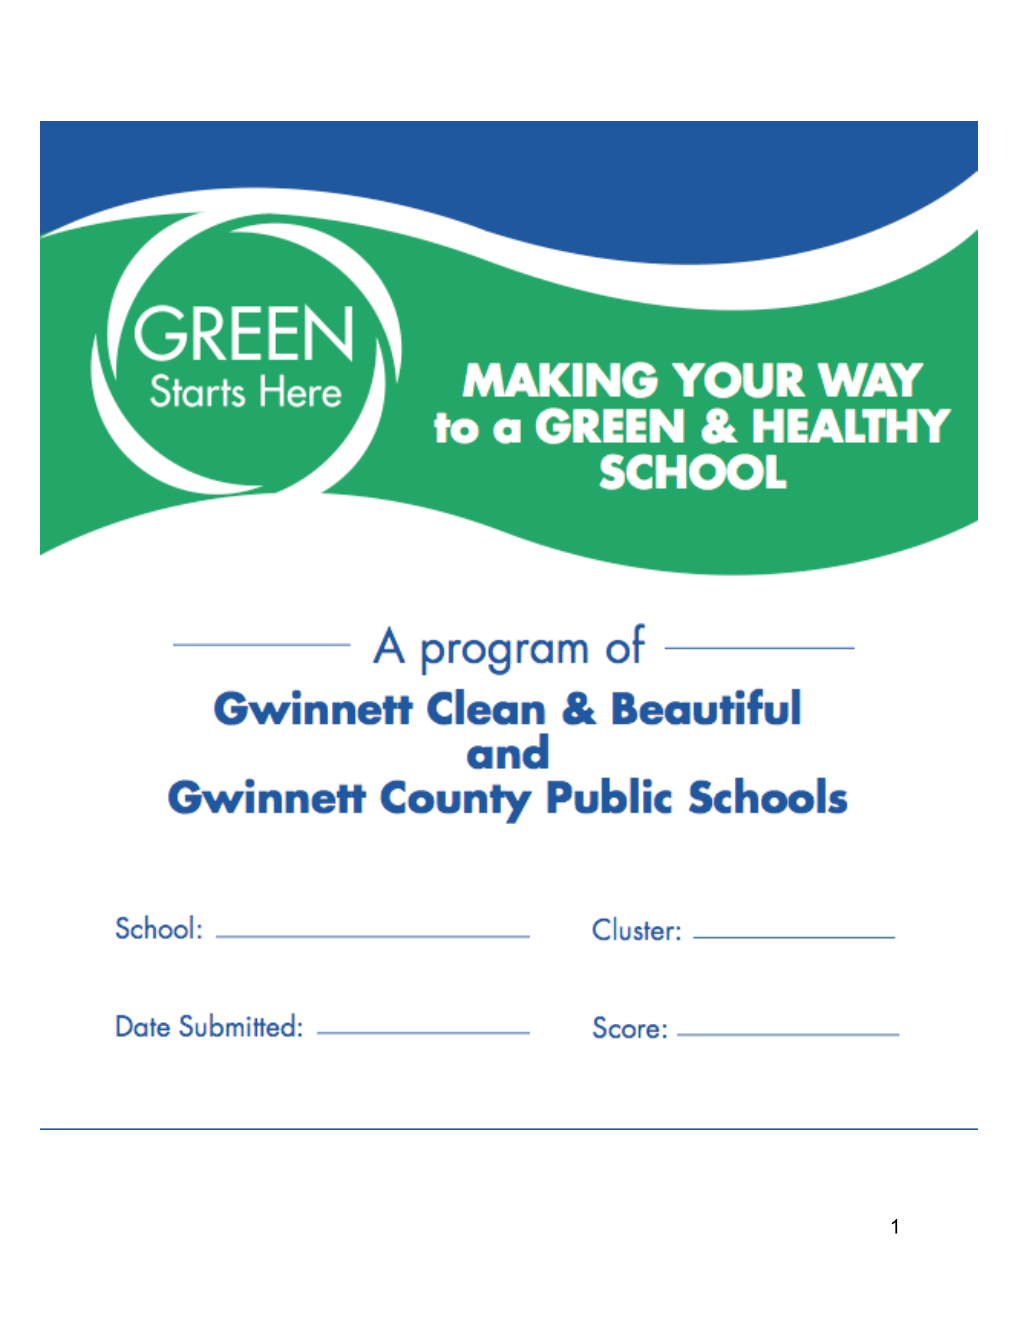 Making Your Way to a Green and Healthy School